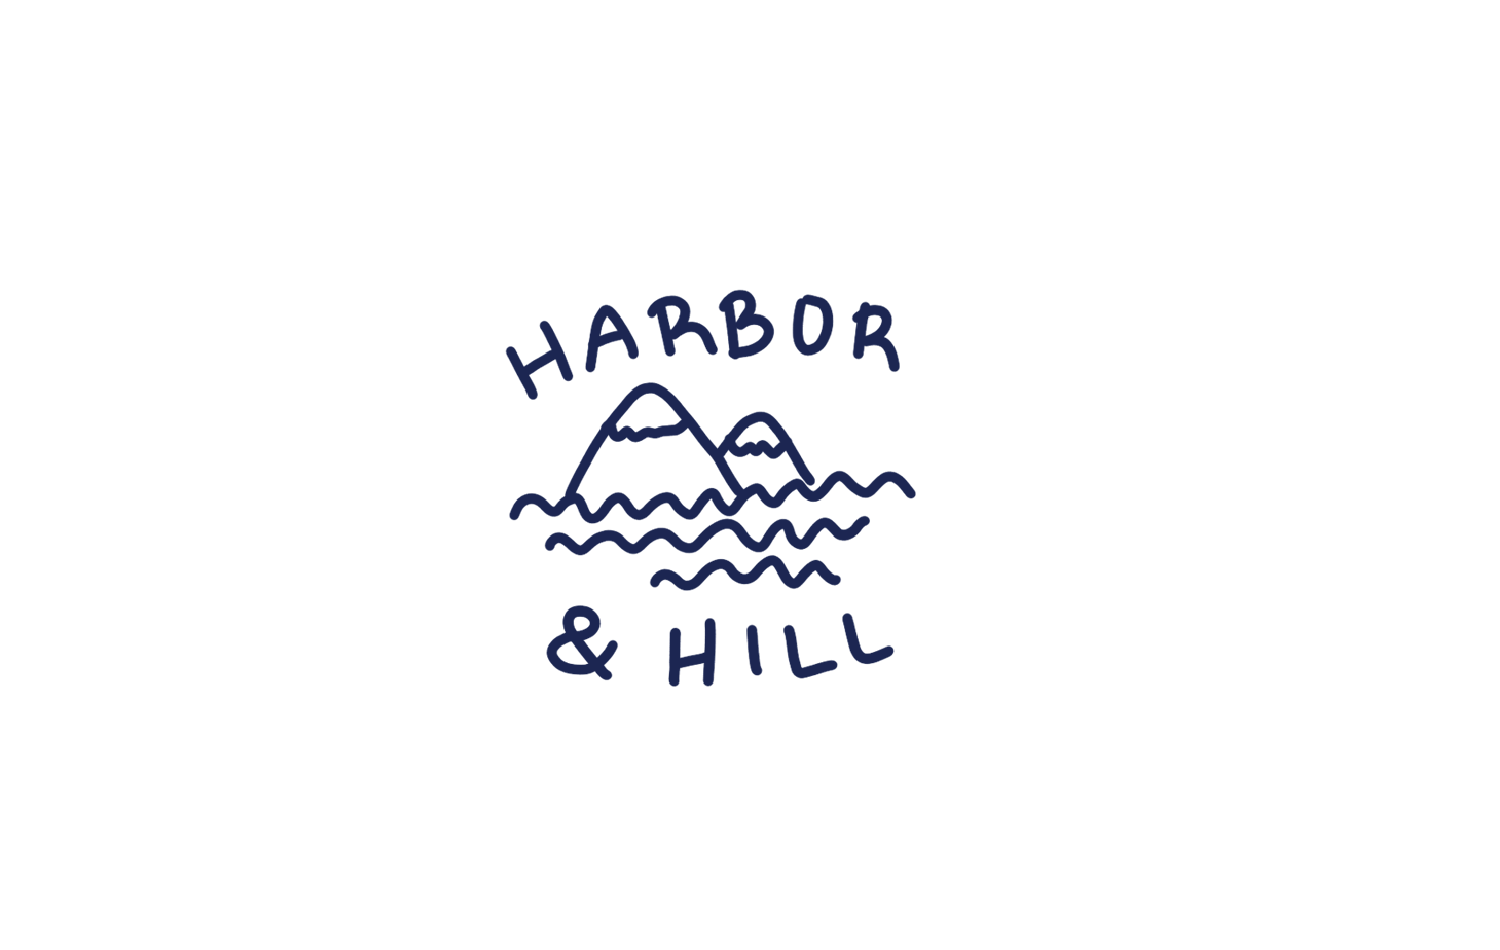 Harbor & Hill sketches